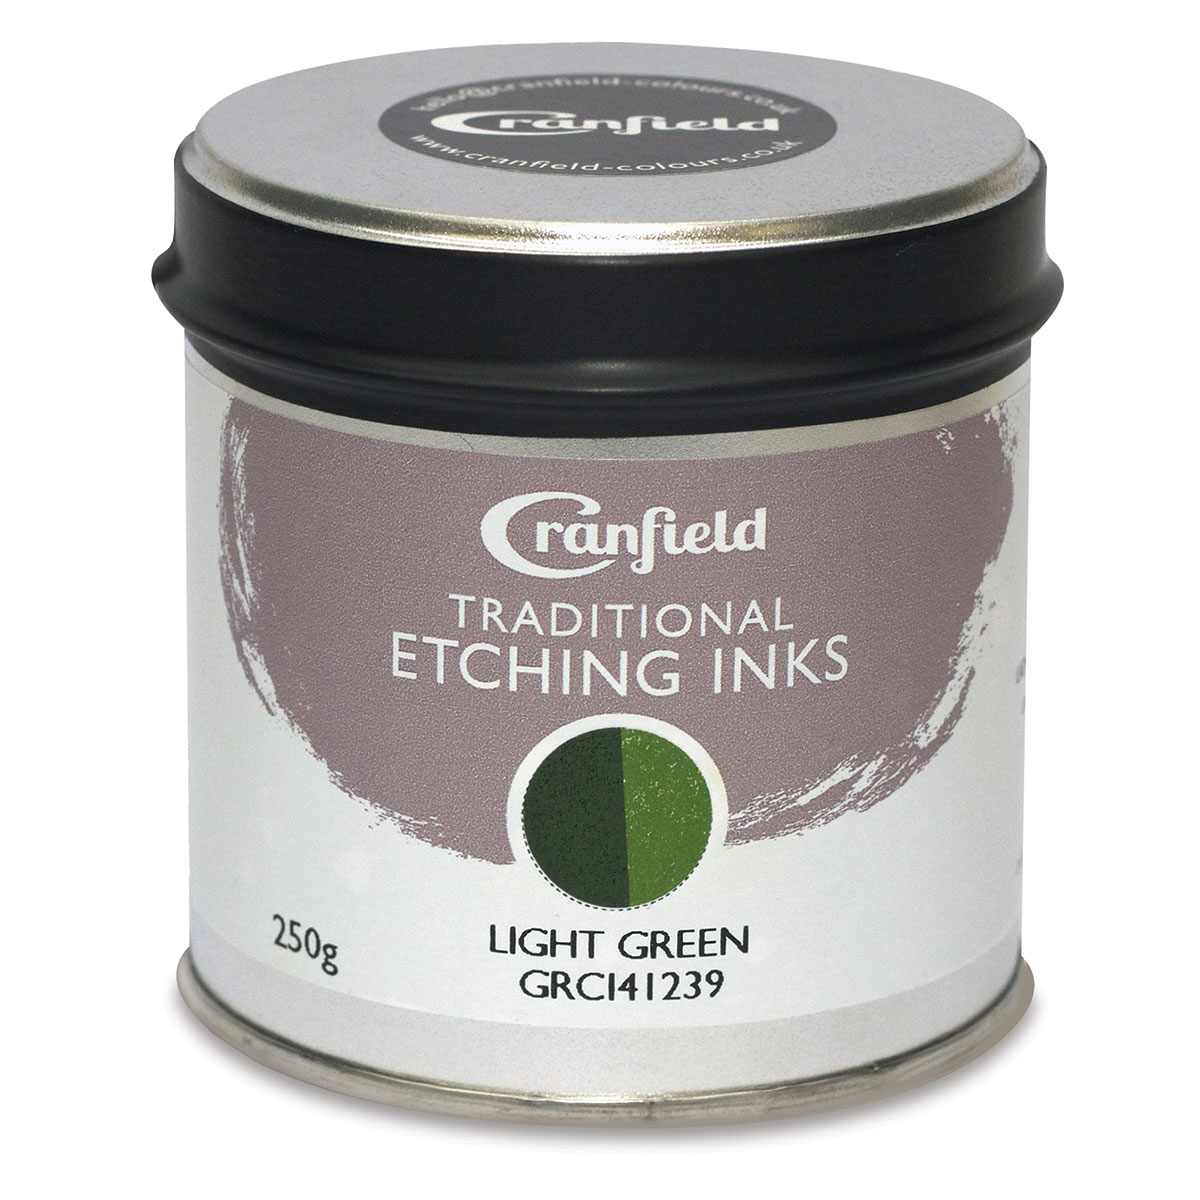 Cranfield Traditional Etching Ink - Light Green 250 g